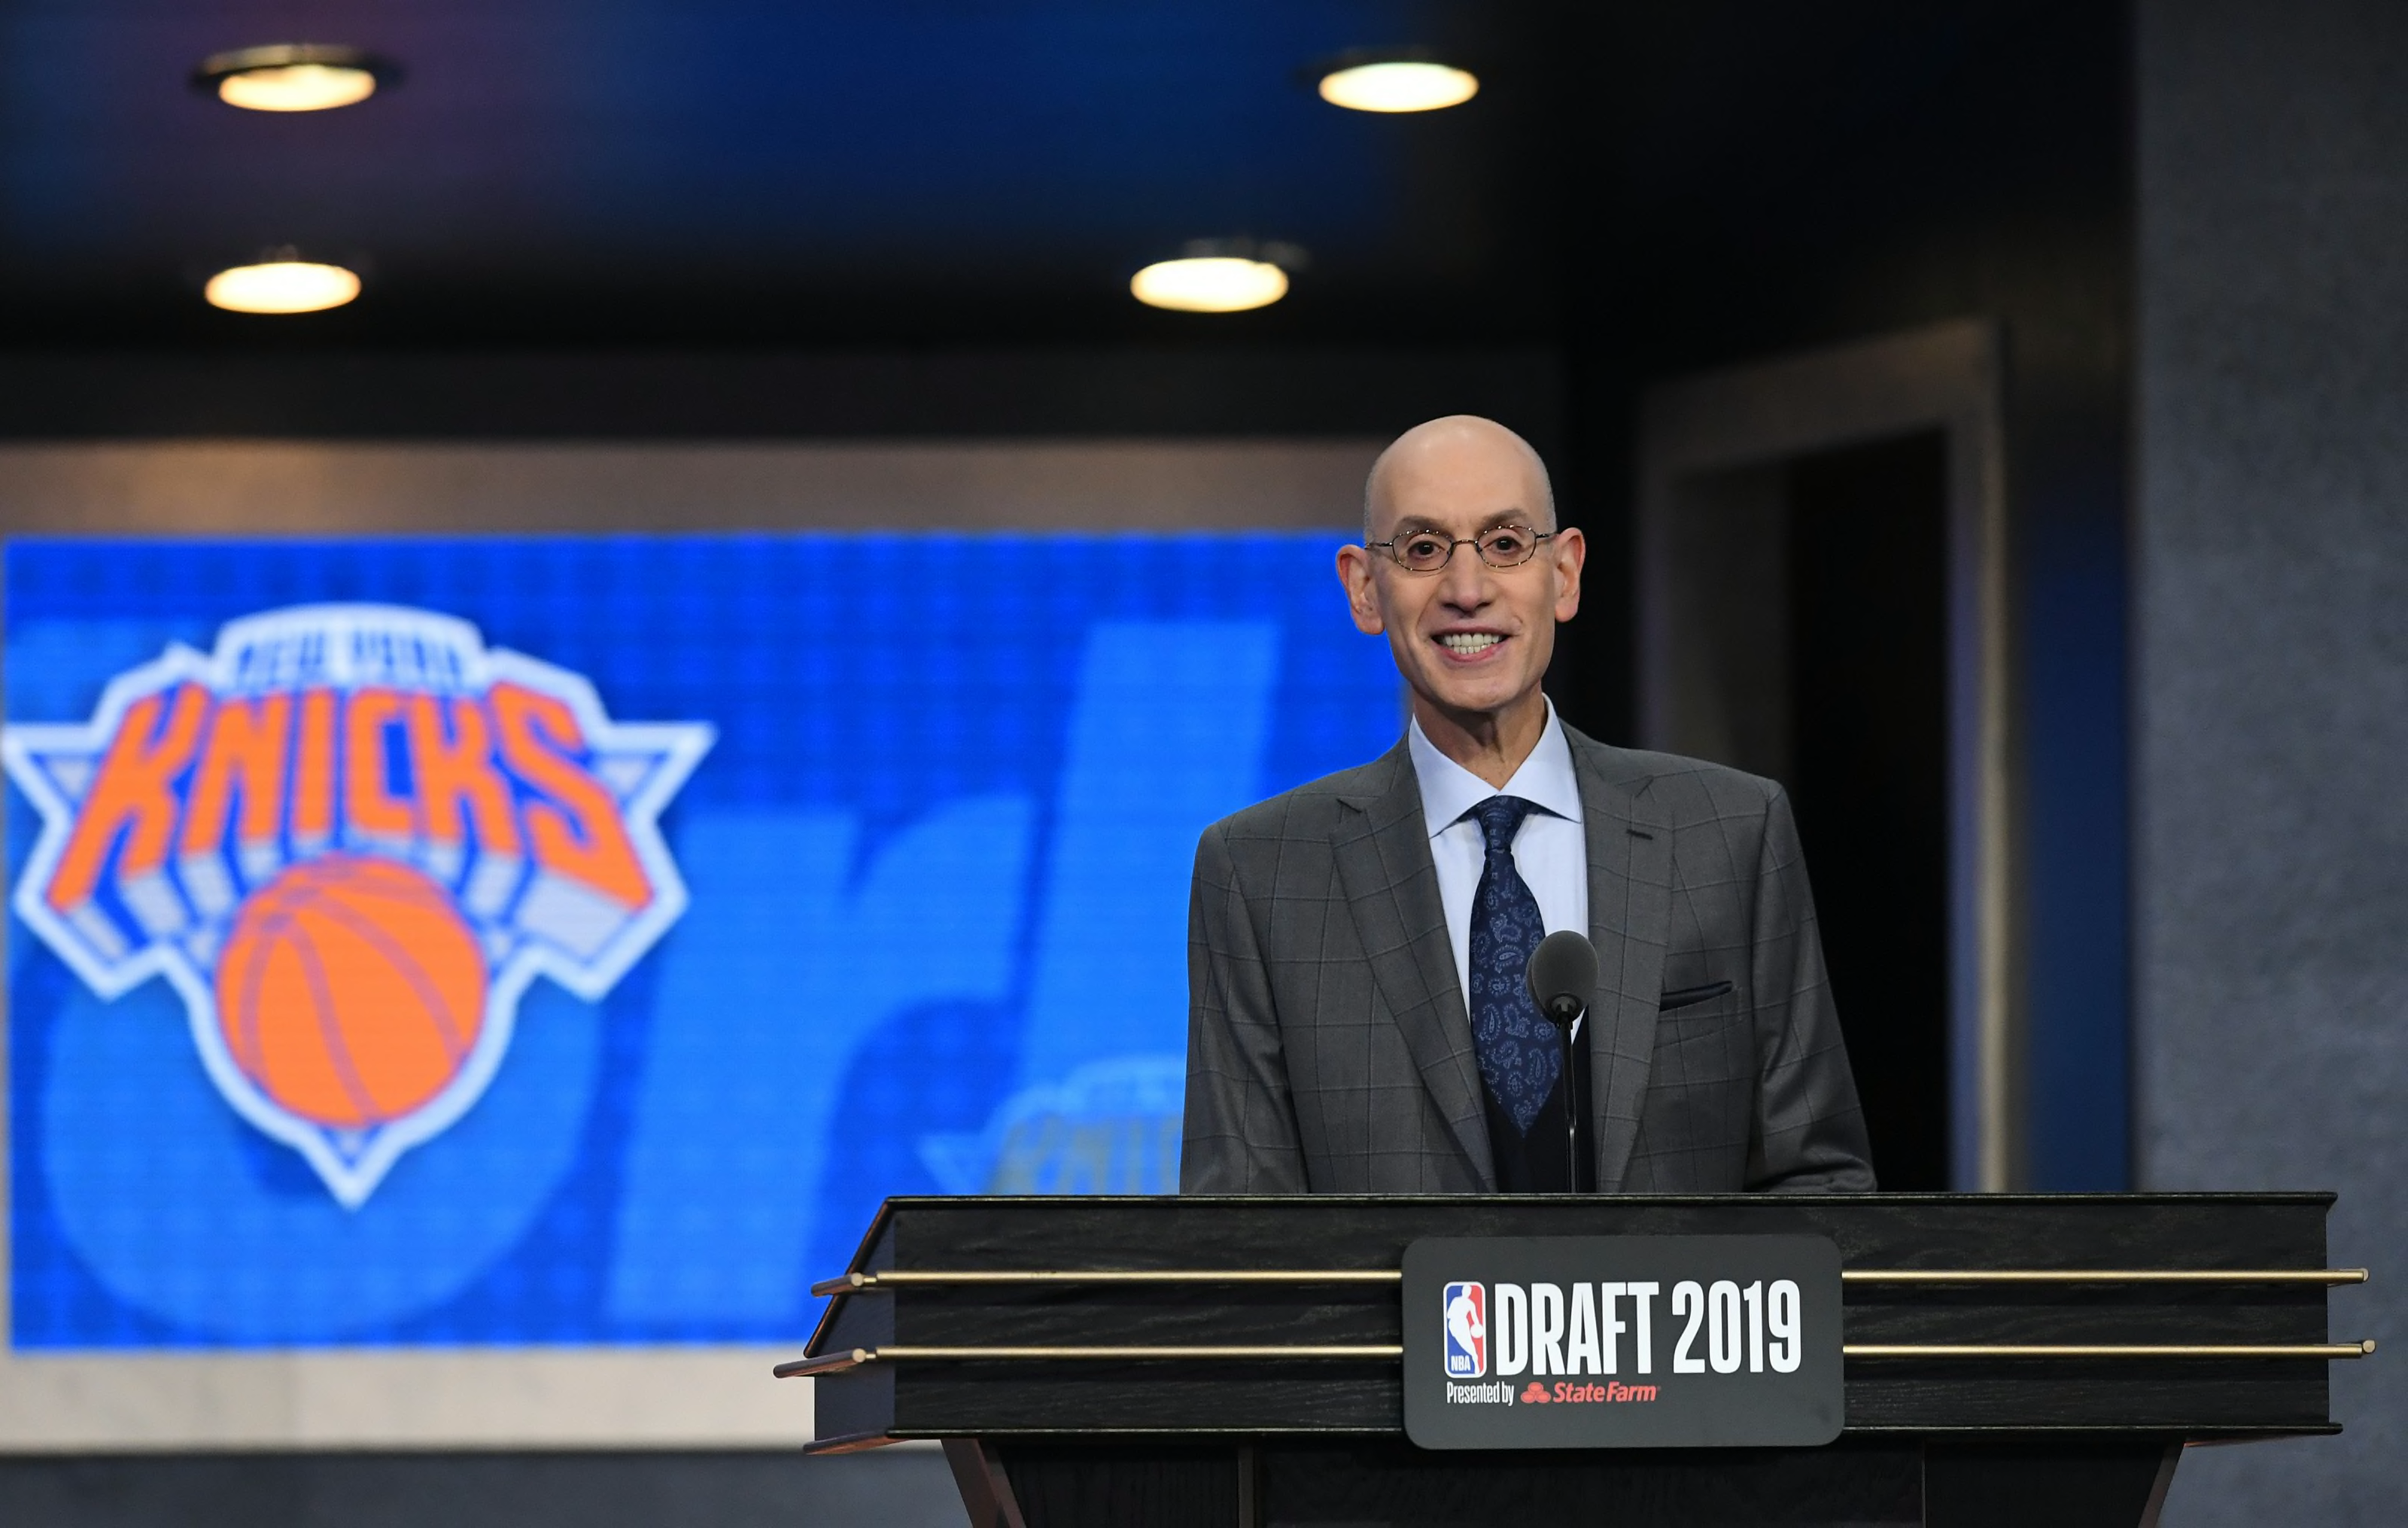 Knicks Armed With Draft Capital, How Will They Spend It?